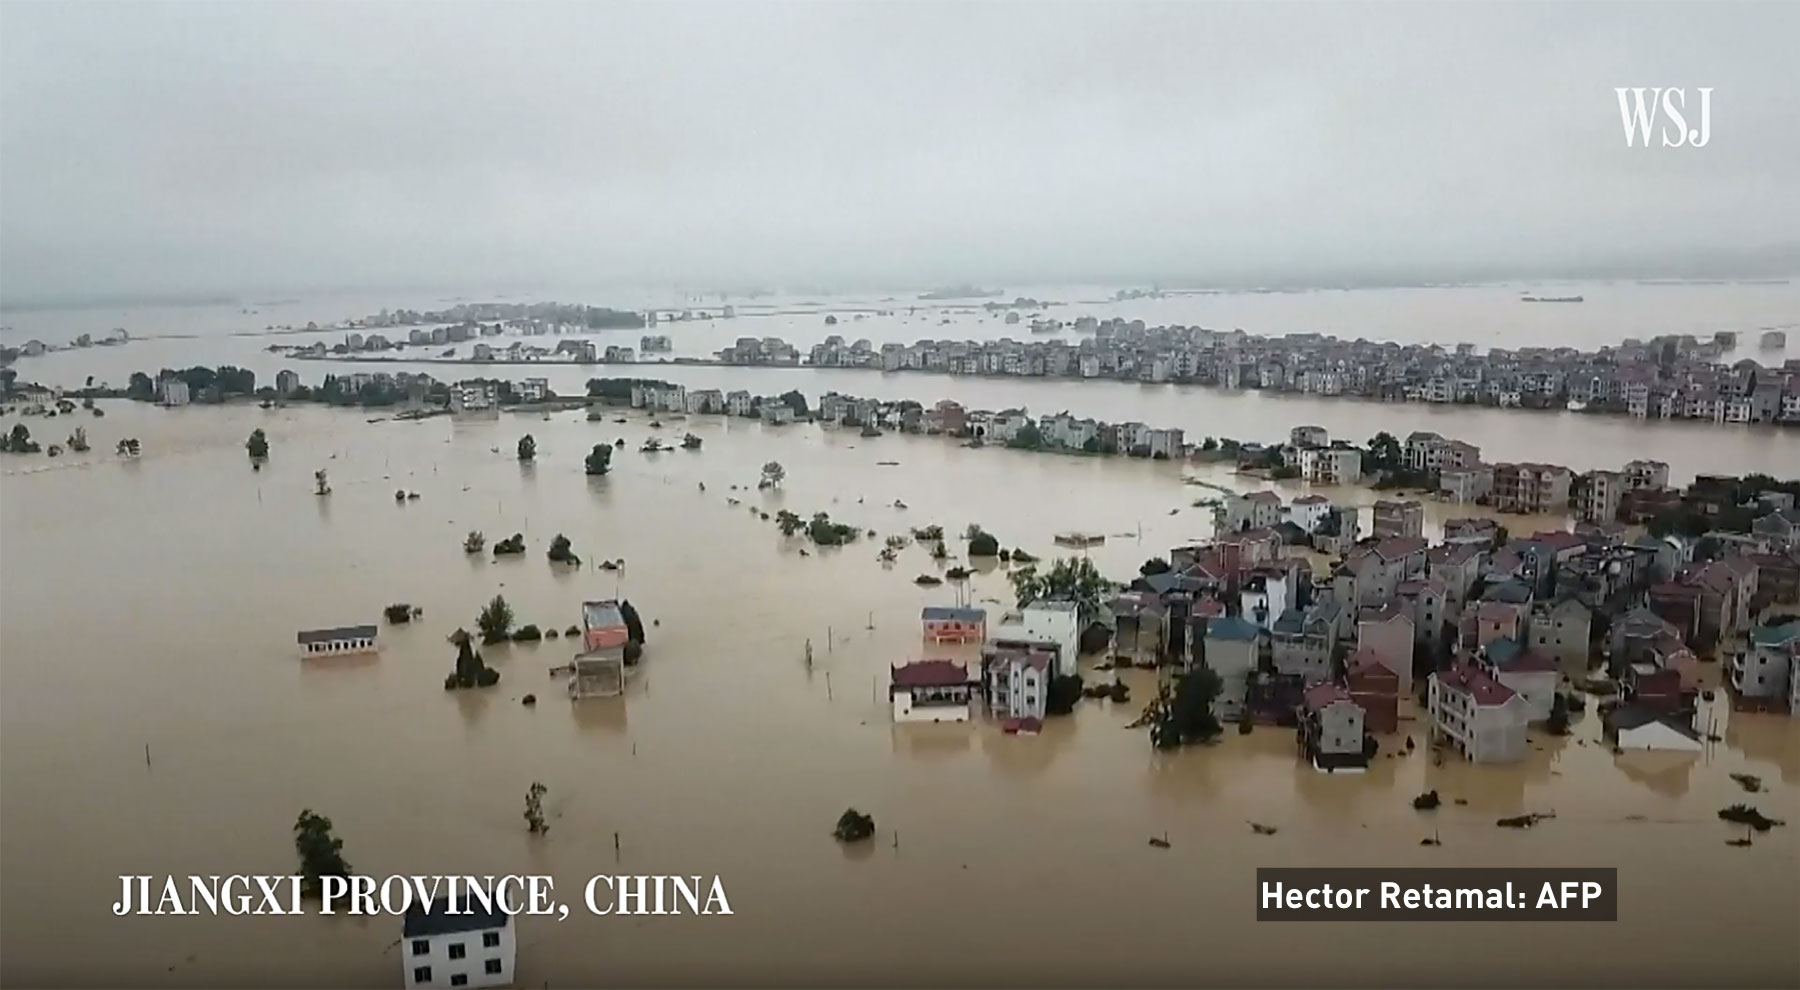 WSJ_Massive_Flooding_in_China_July_2020